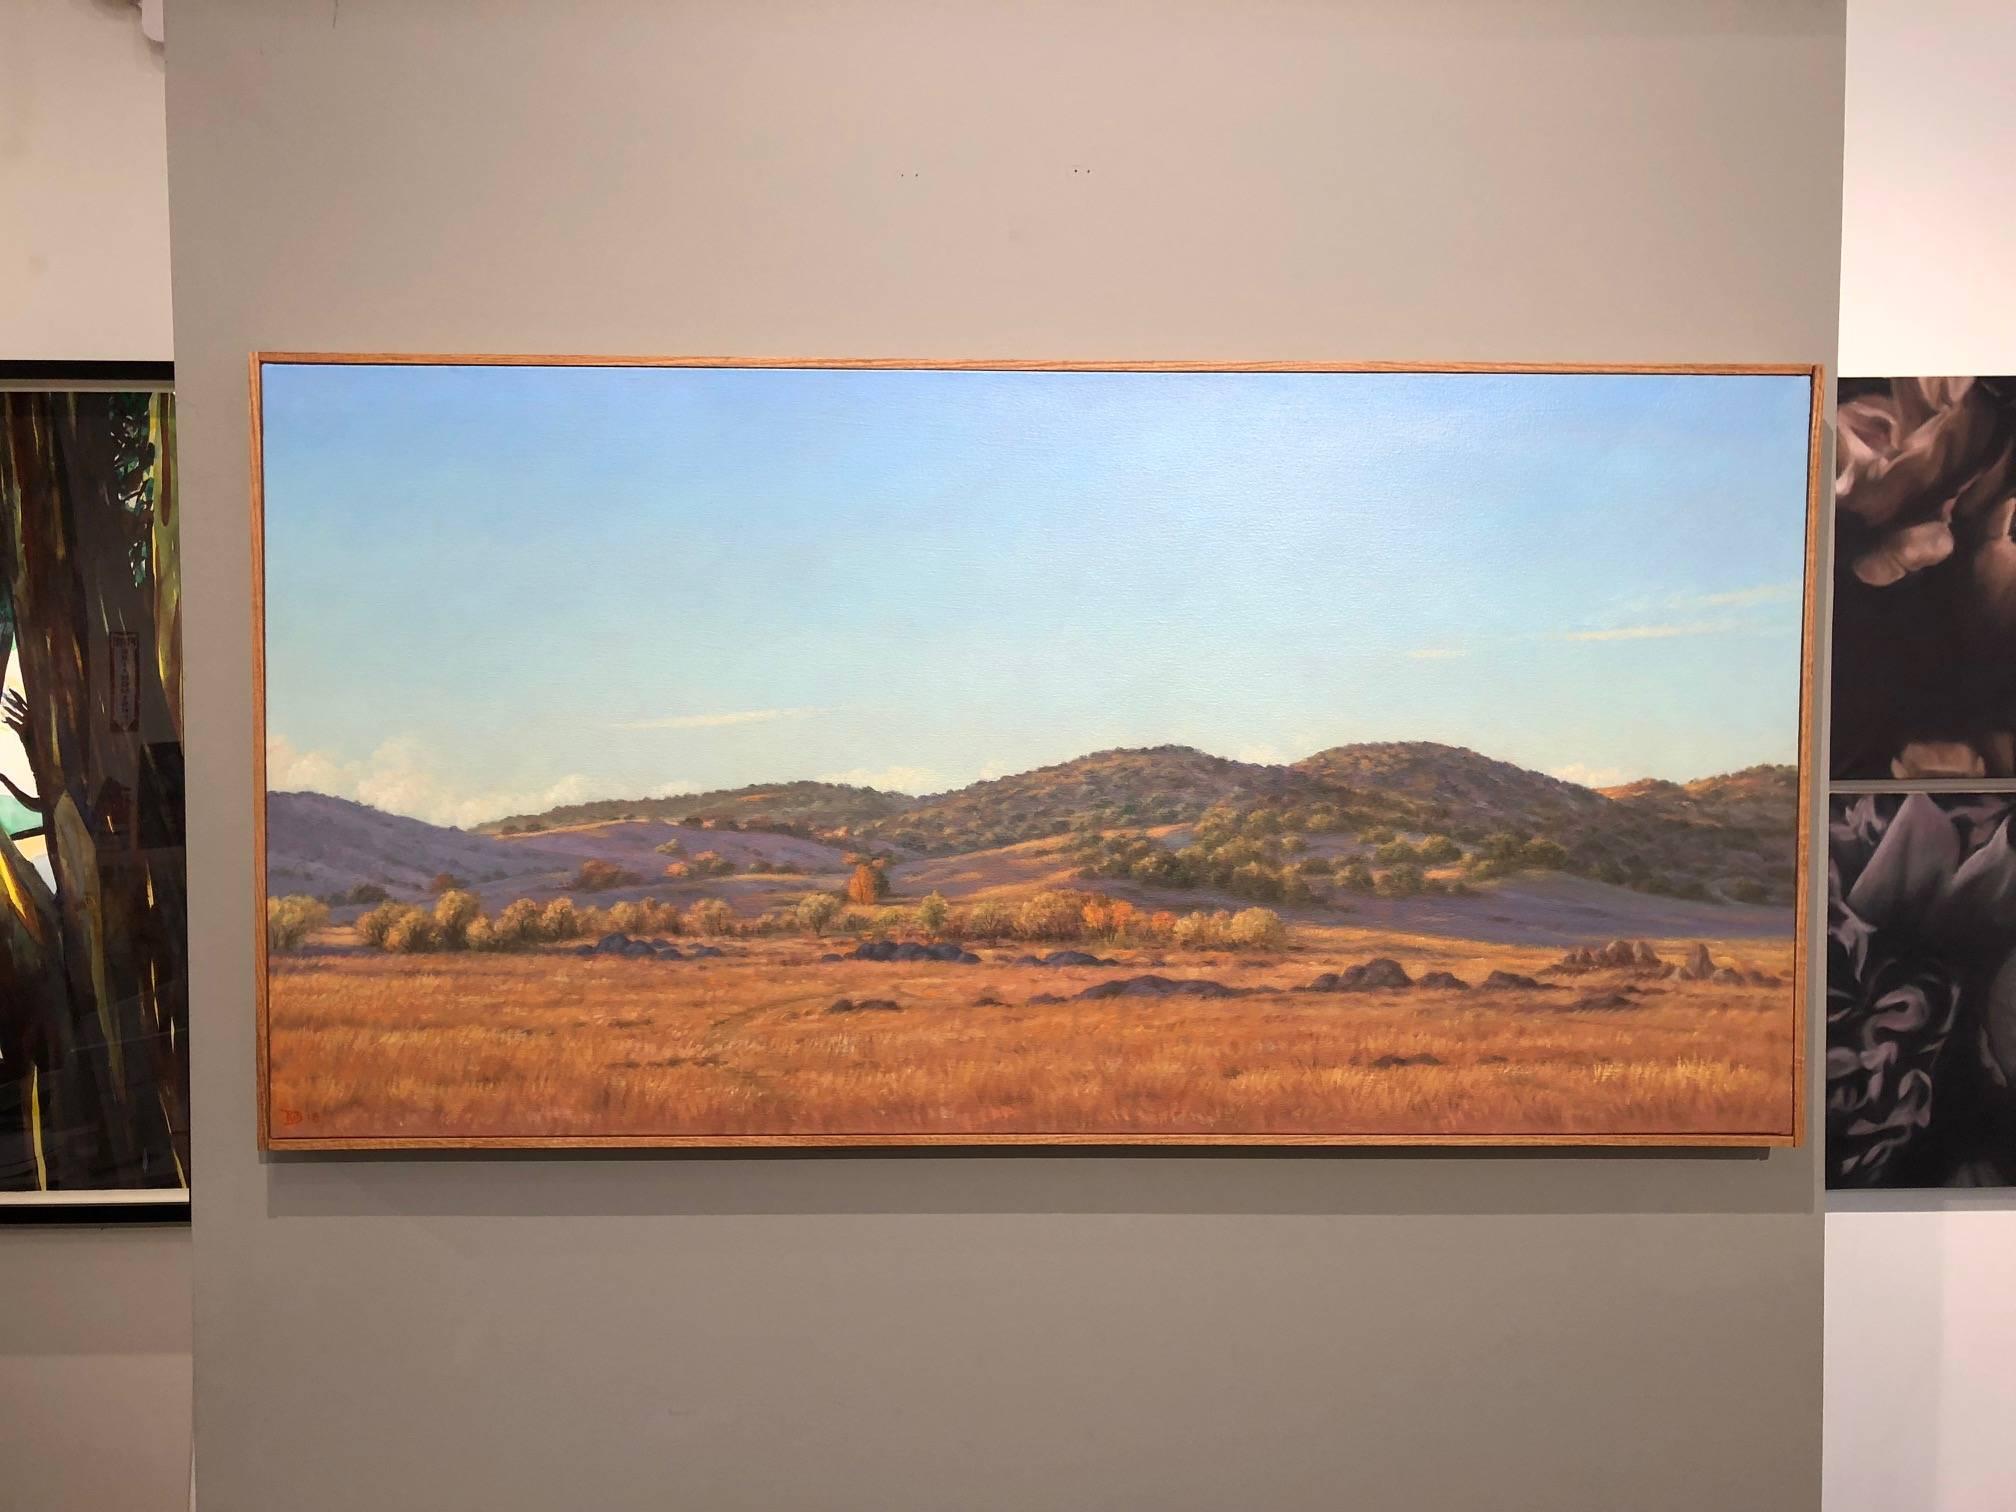 Going to Borrego oil painting, contemporary landscape  — in blue, orange, purple, green. Early morning warm western rolling hills with clear sky. 24 x 48 inches. 

One of our finest American contemporary realist painters, Willard Dixon has painted